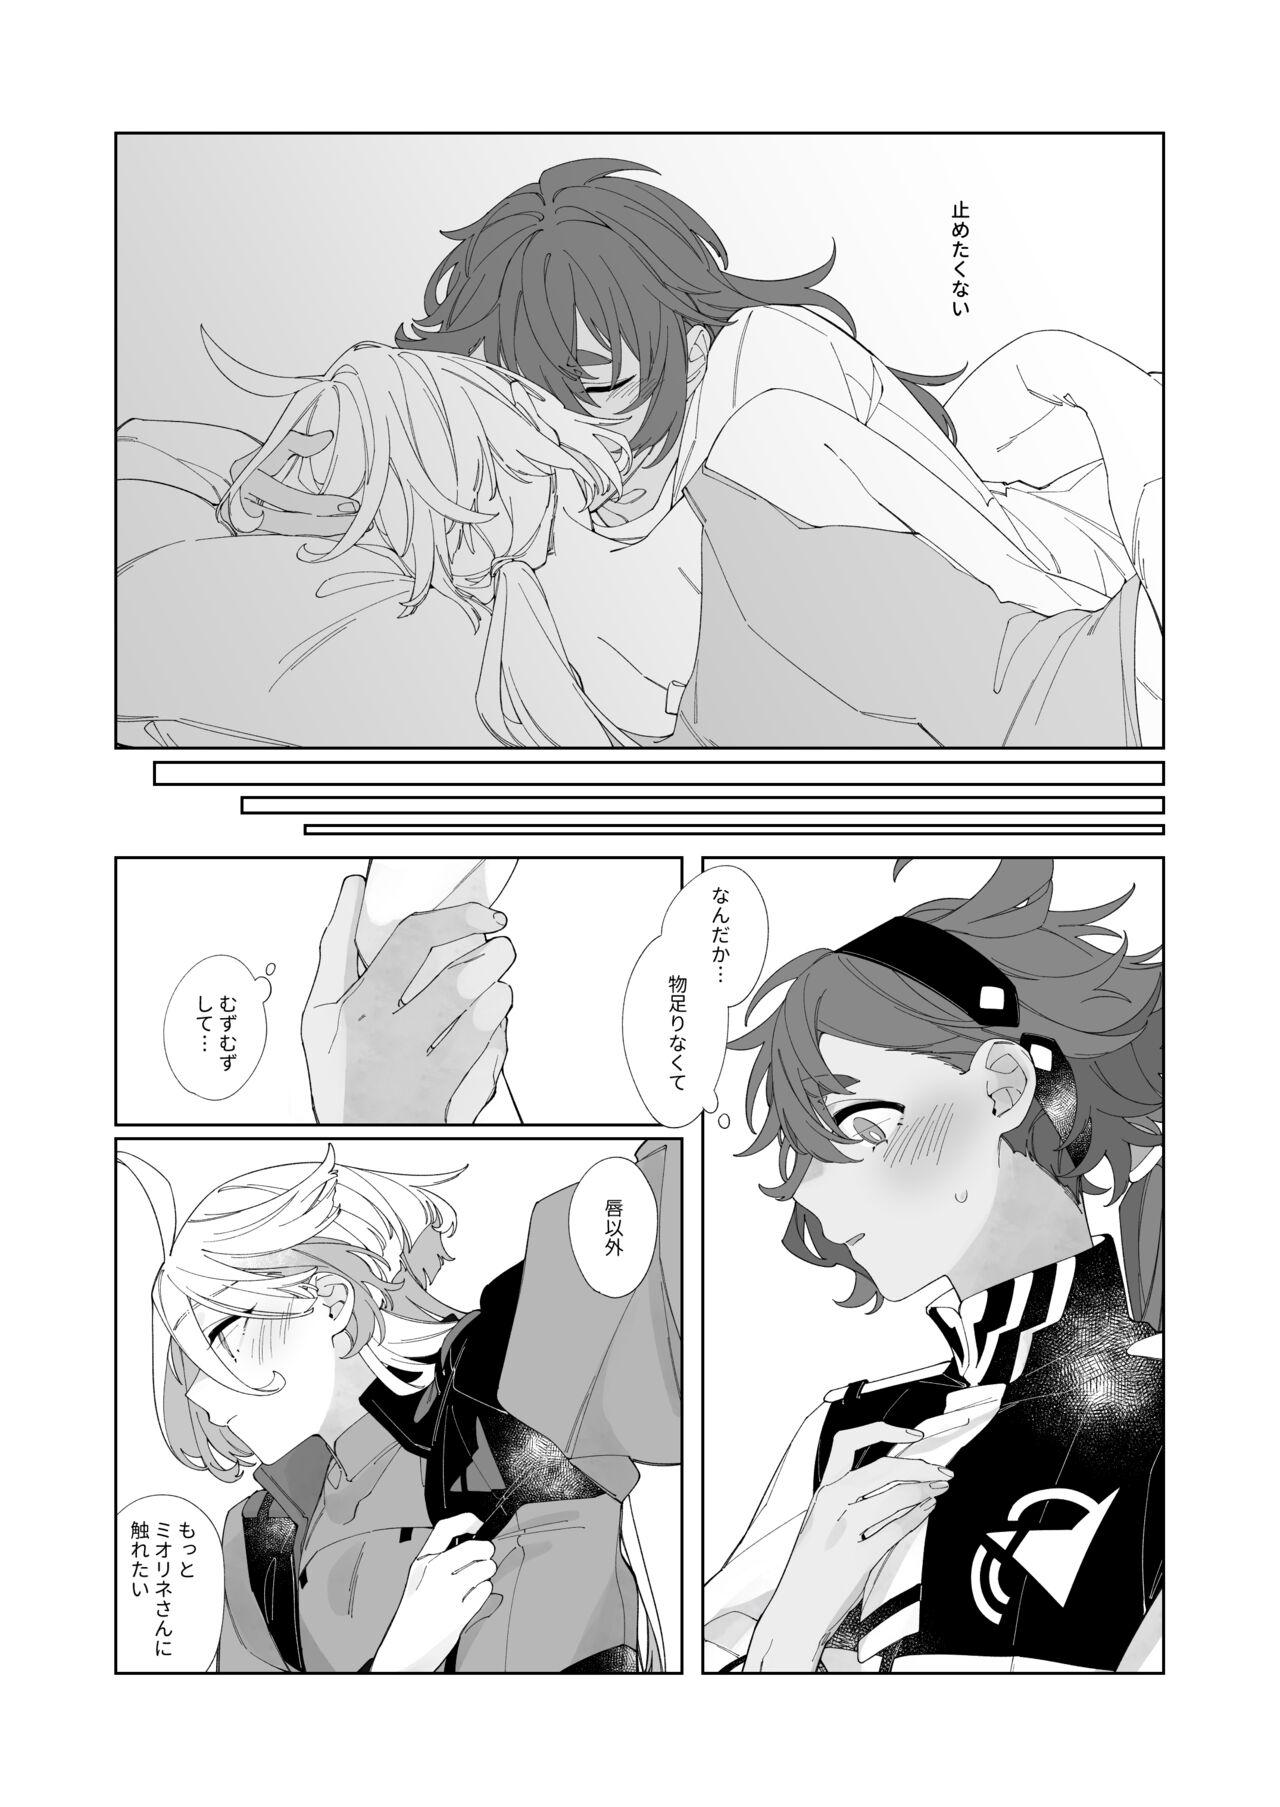 Gay College Kiss no Ato Nani ga Shitai? - After kissing, what else do you want to do? - Mobile suit gundam the witch from mercury Femdom Pov - Page 10